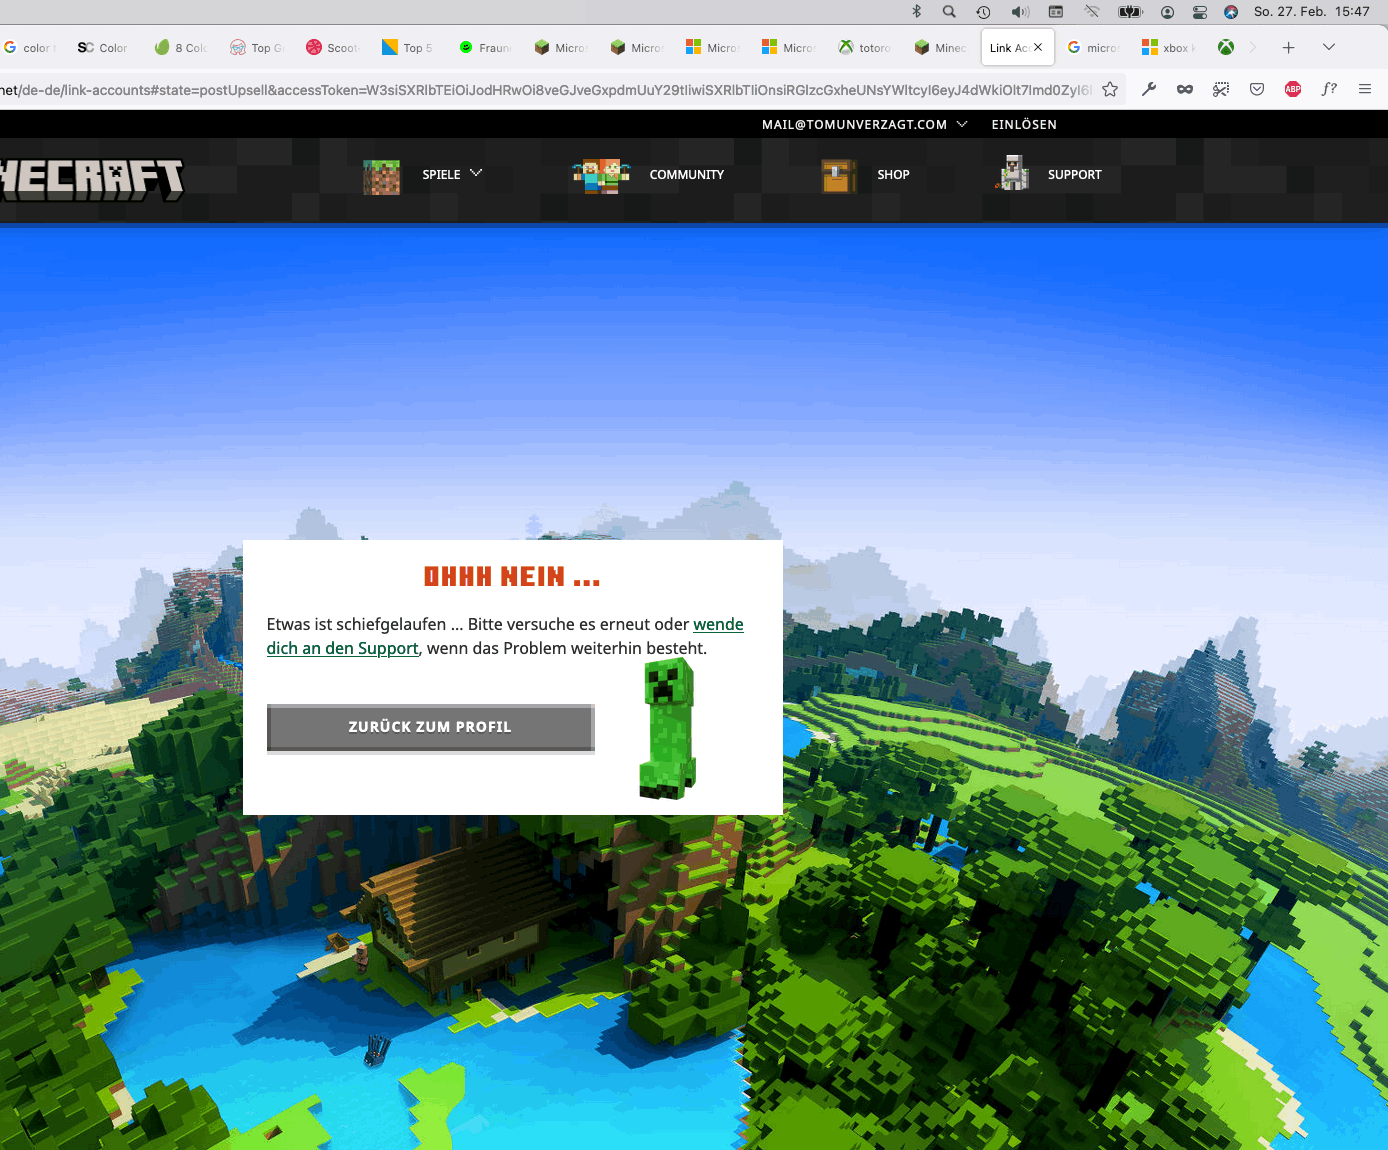 Fix Can't Login to Minecraft Launcher After Migrating Mojang Account To  Microsoft 